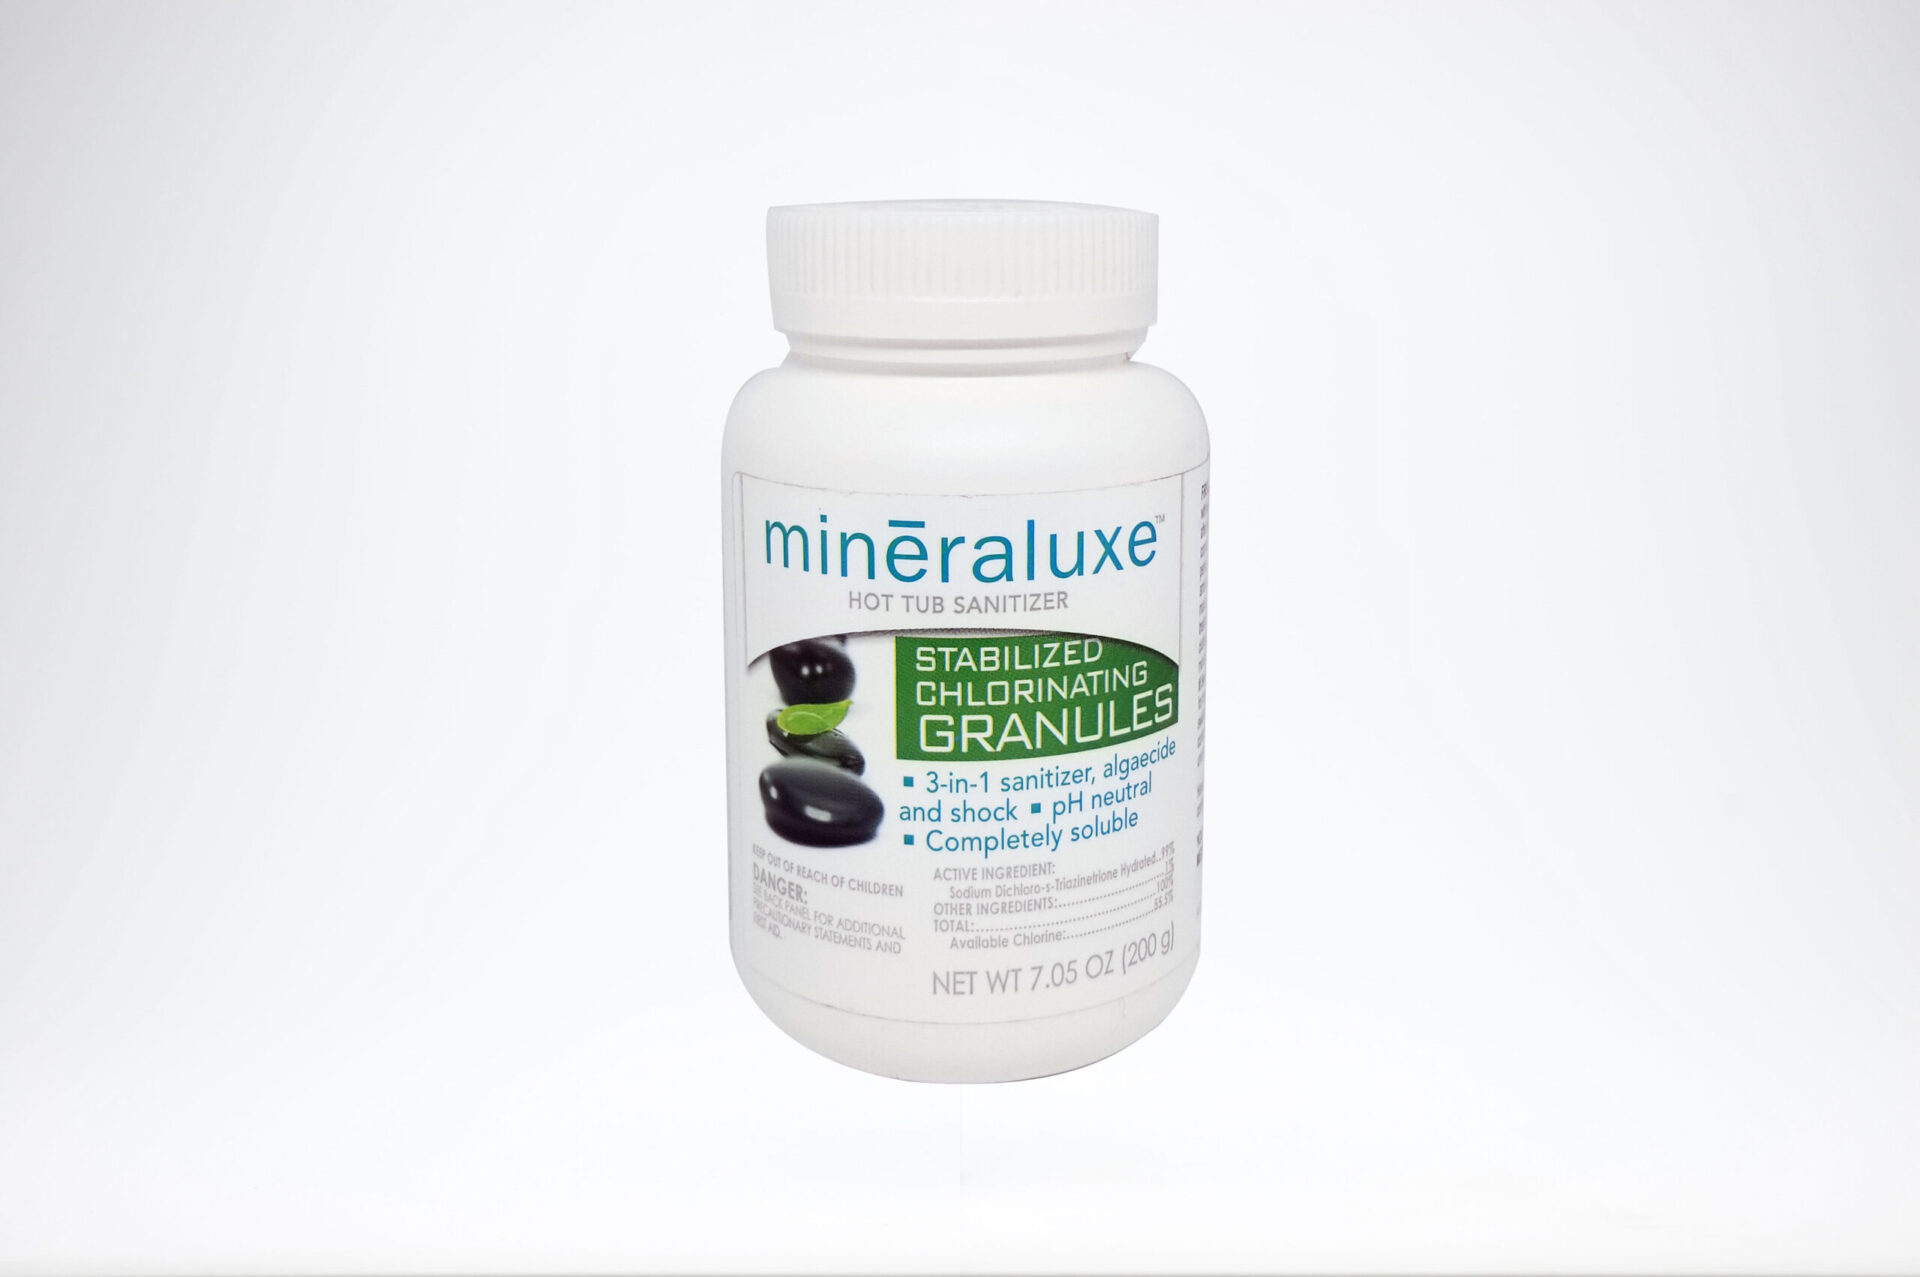 Mineraluxe Stabilized Chlorinating Granules 200g 1 scaled - MINERALUXE CHLORINE GRANULES - 200g